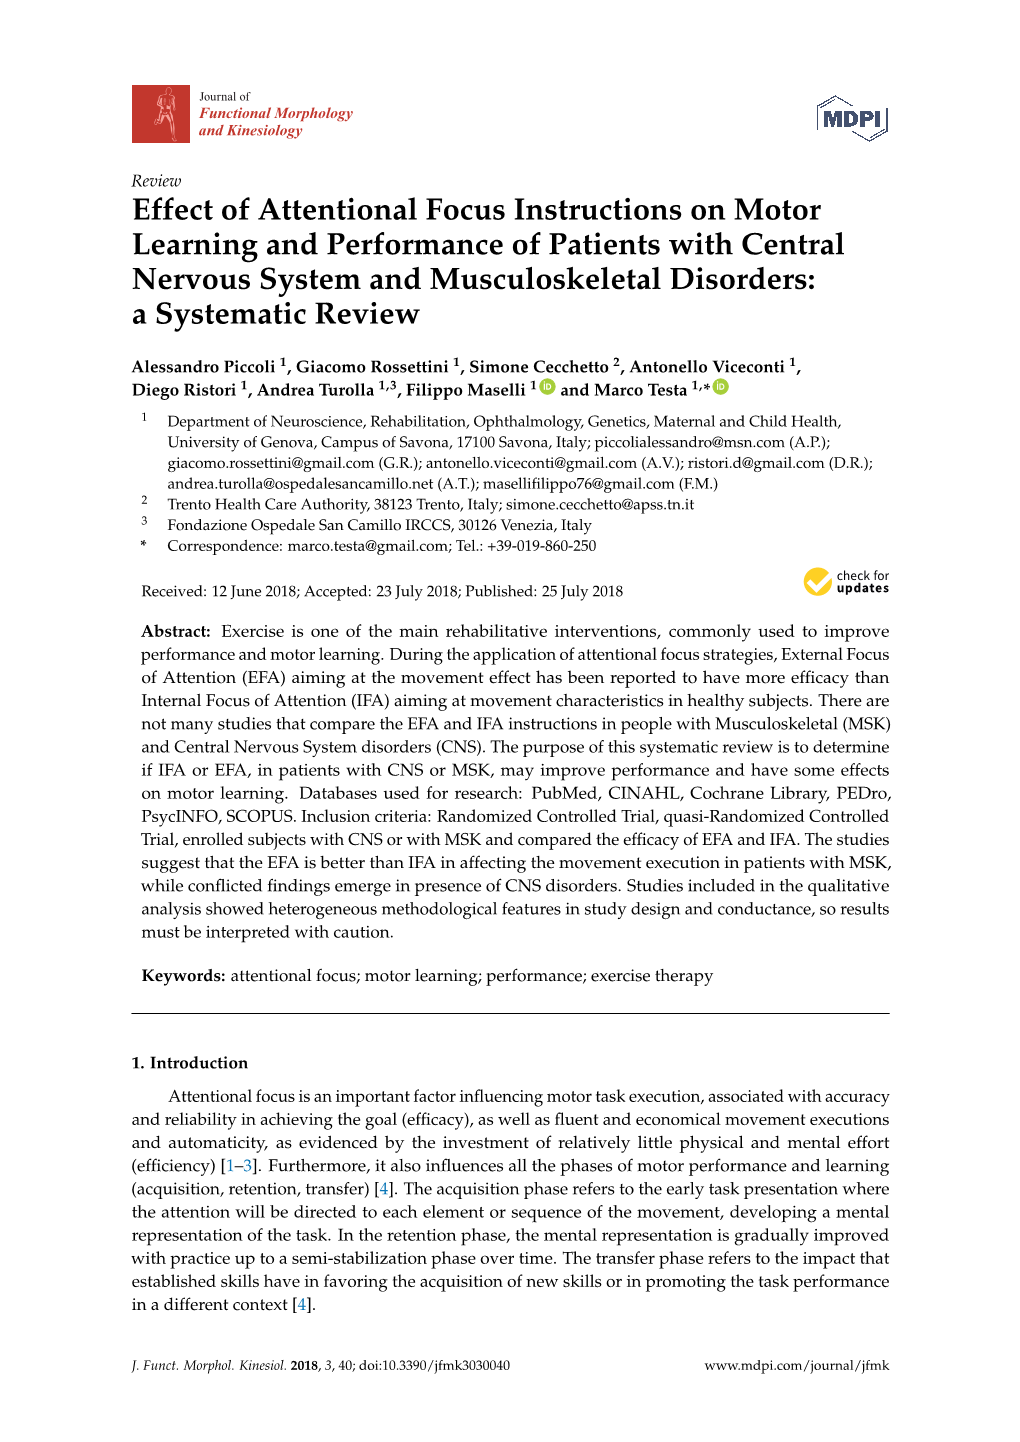 Effect of Attentional Focus Instructions on Motor Learning and Performance of Patients with Central Nervous System and Musculoskeletal Disorders: a Systematic Review